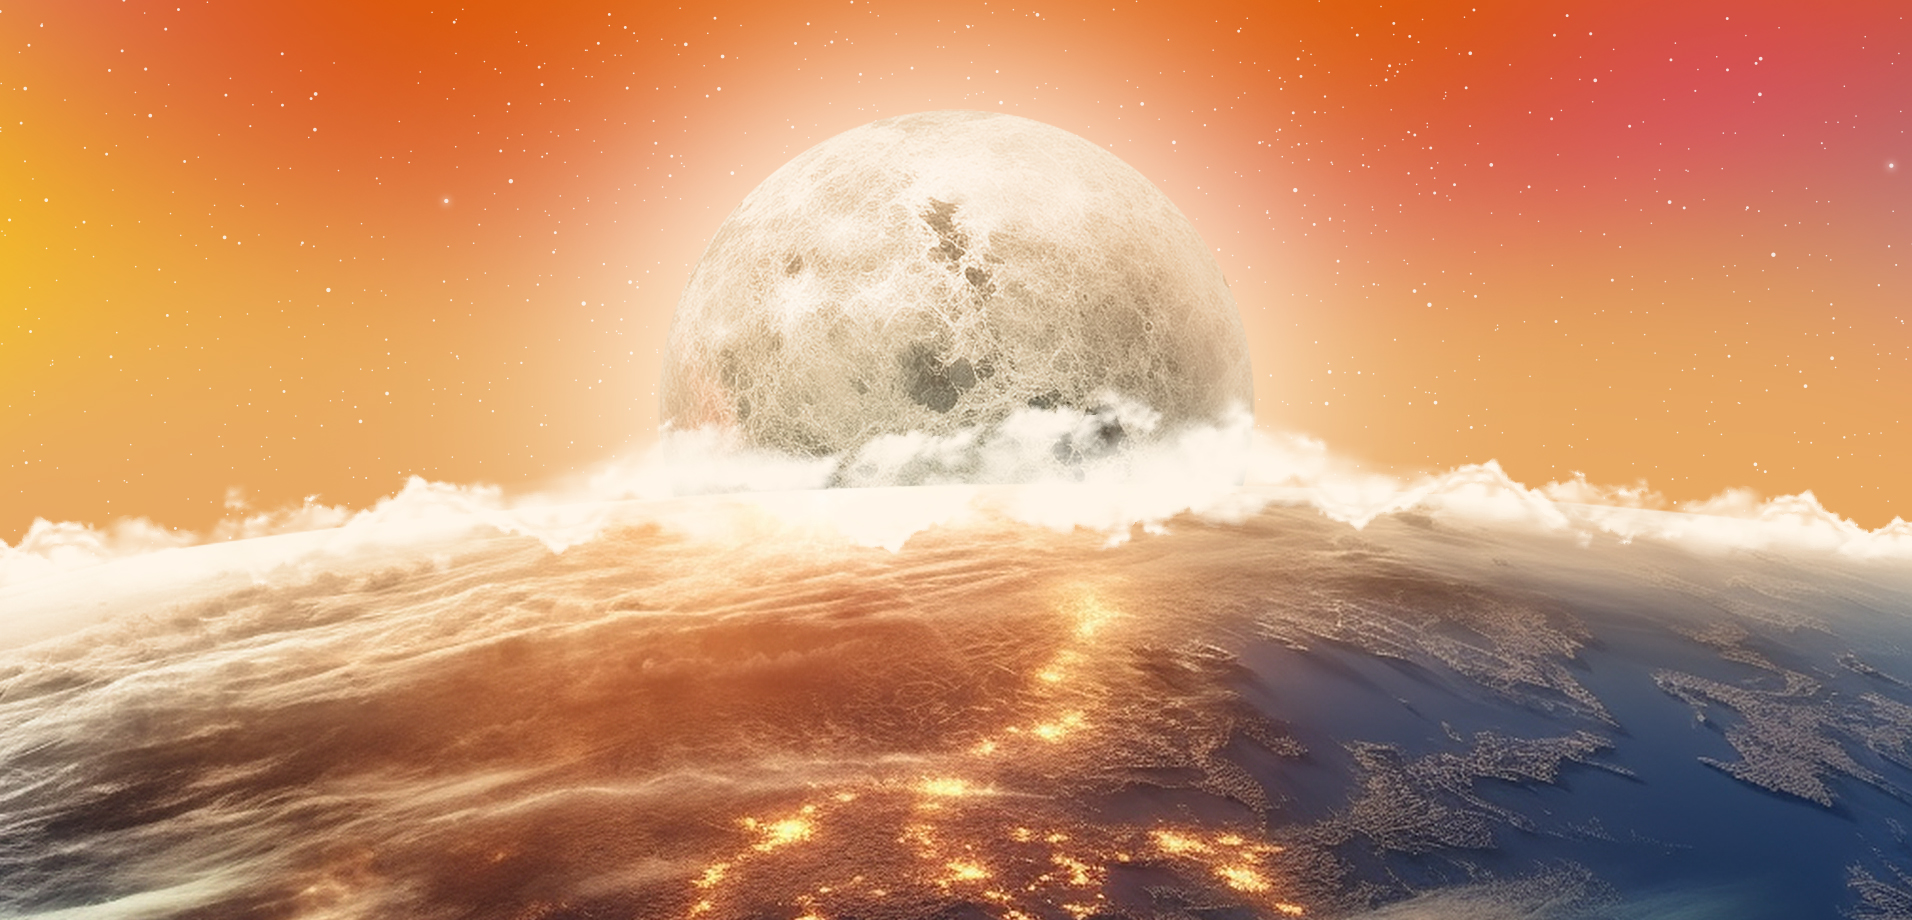 Lunar Apocalypse: What would happen if the Moon disappeared?